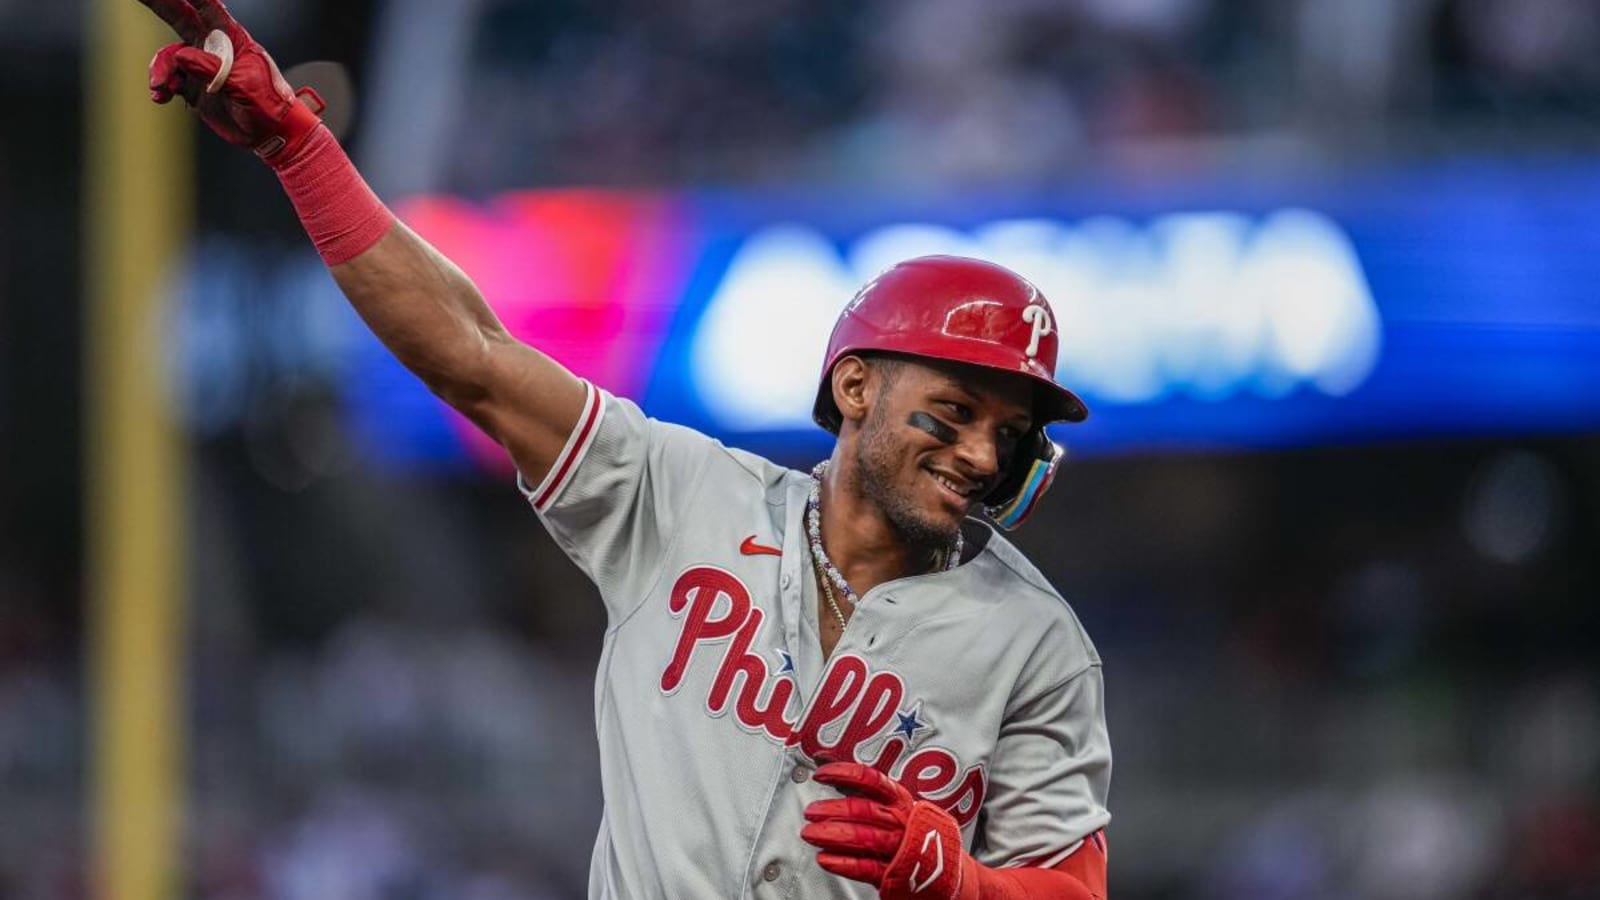 Phillies OF Has Most To Prove in Spring Training